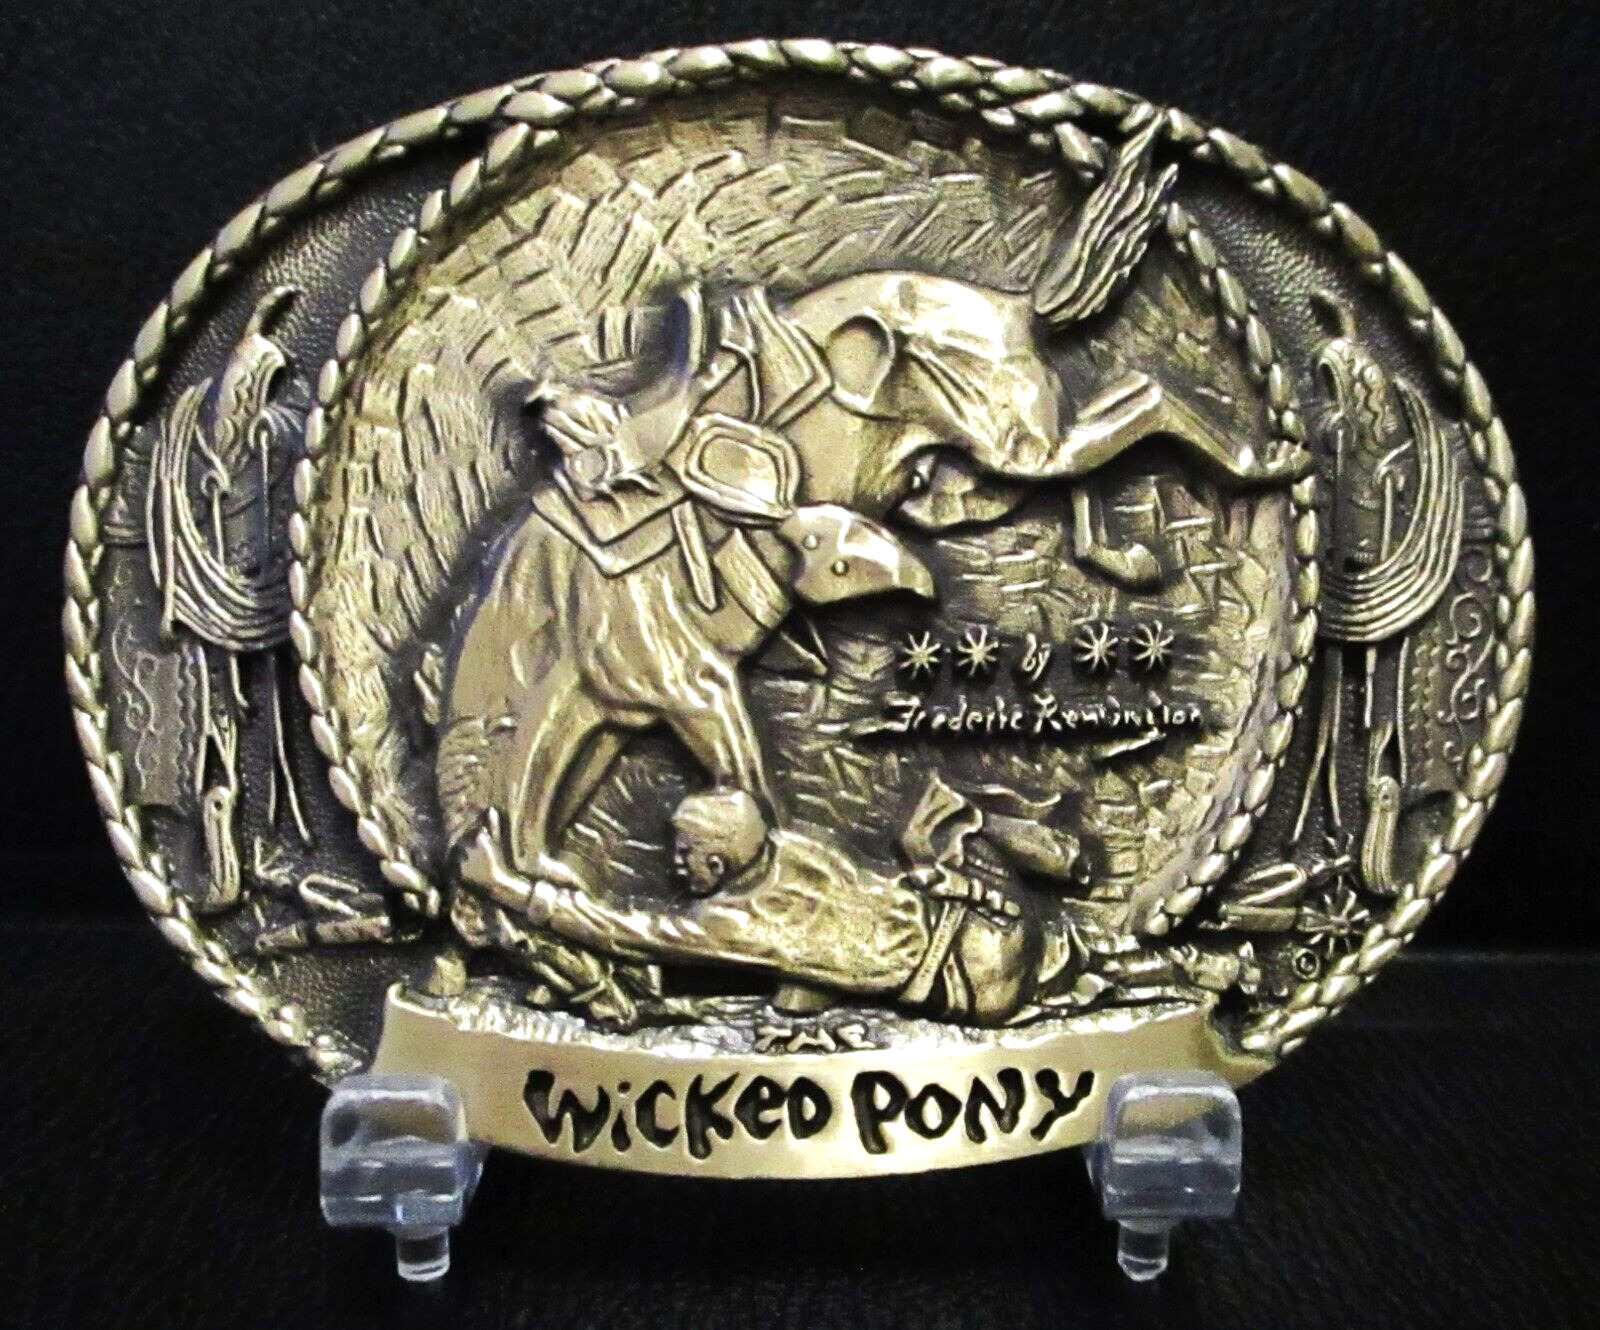 Frederic Remington Wicked Pony Belt Buckle Bronc Riding 10th Anniv. 1982 Western